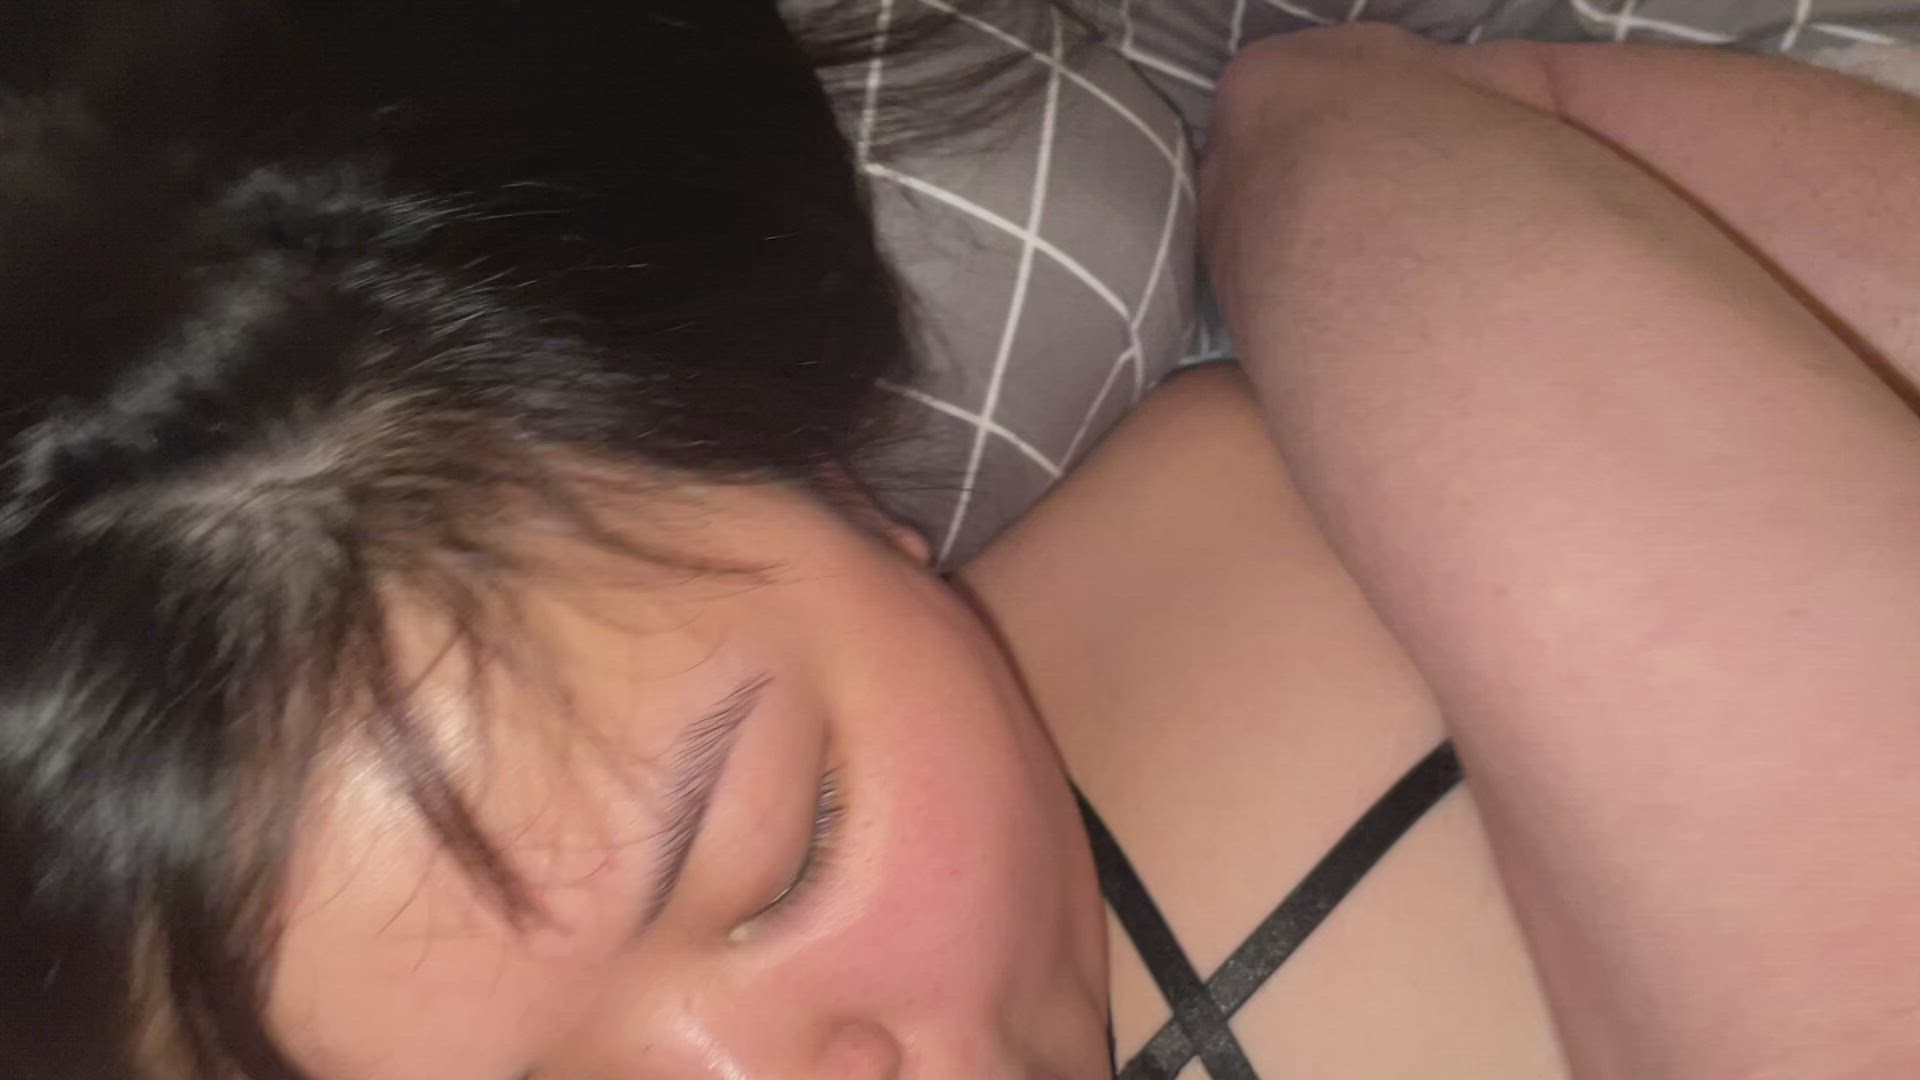 Asian porn video with onlyfans model innocentthot <strong>@innocentthots</strong>